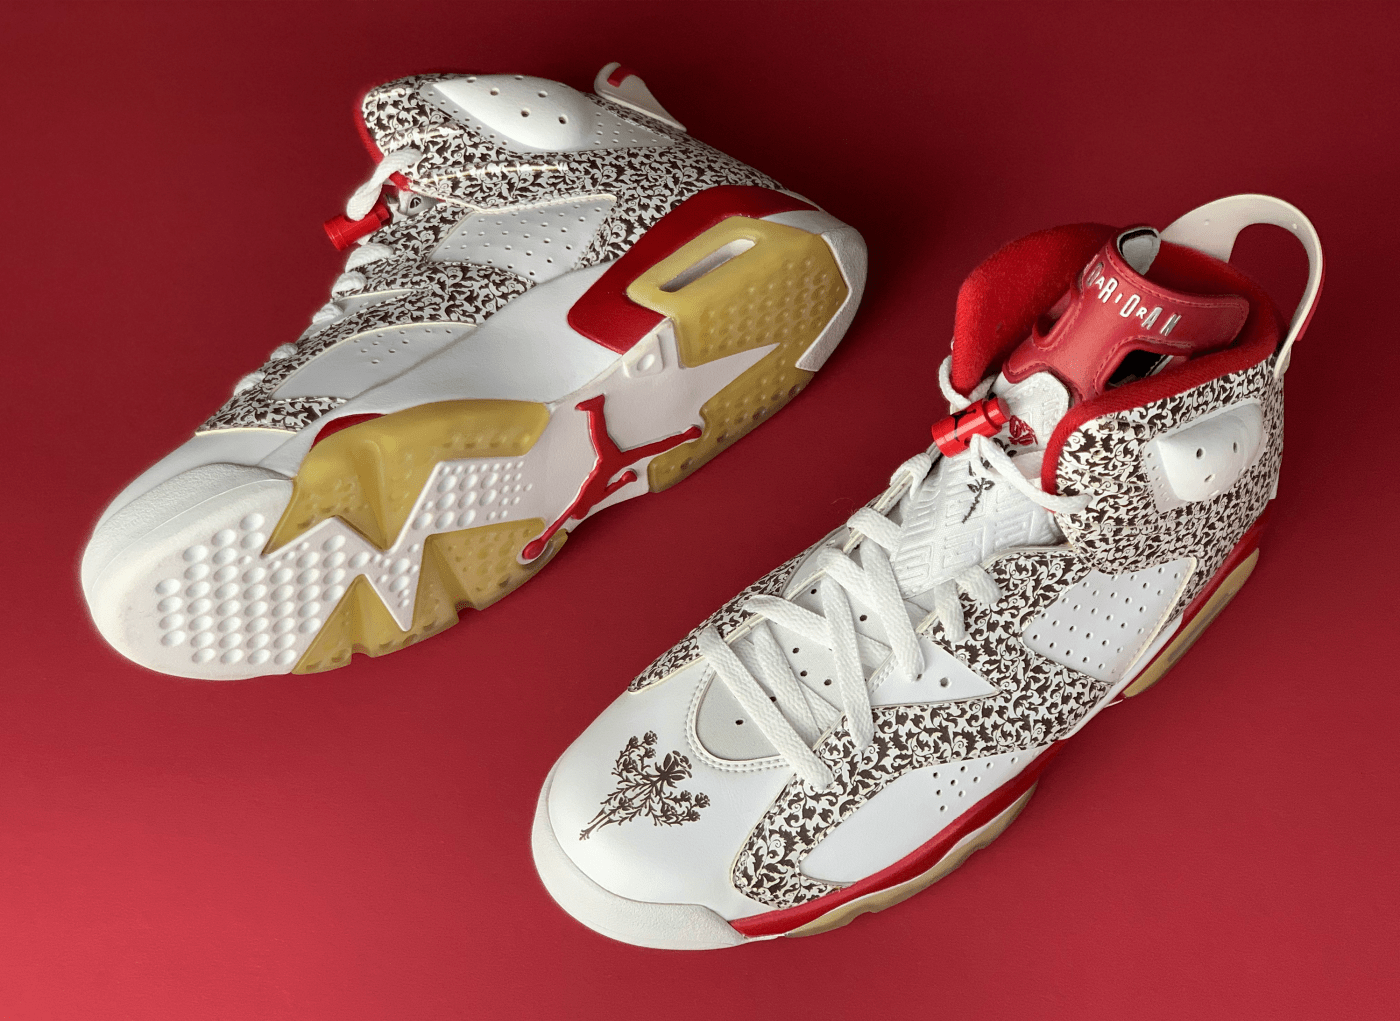 West's 'Donda' Jordan 6, Meaning Behind Sneakers | Complex